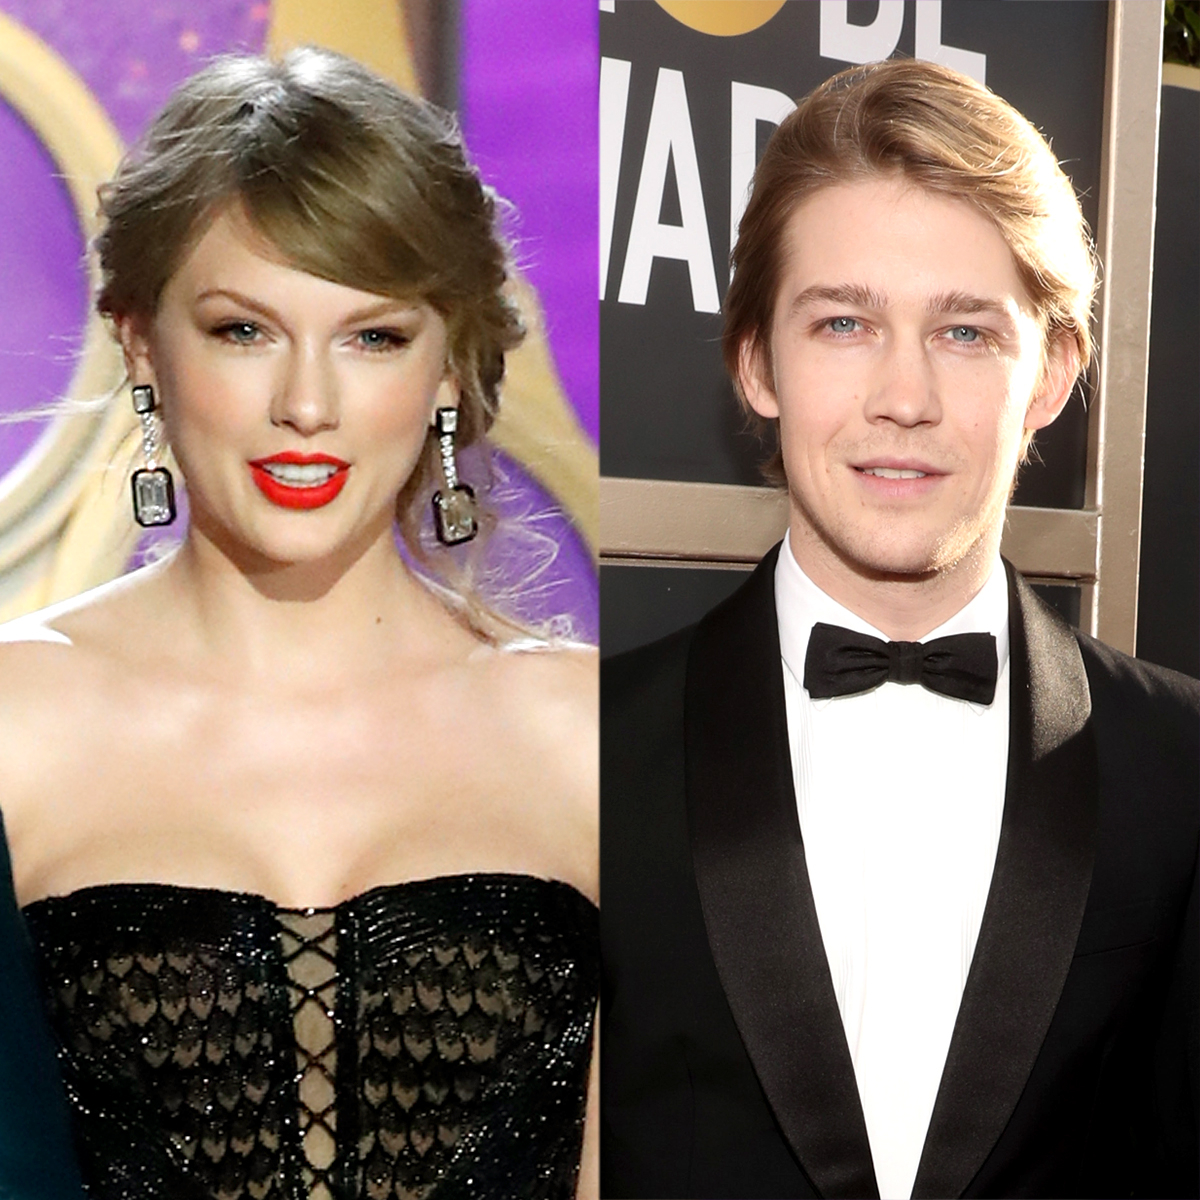 Taylor Swift’s Grammys After-Party Outfit Featured a Nod to Joe Alwyn